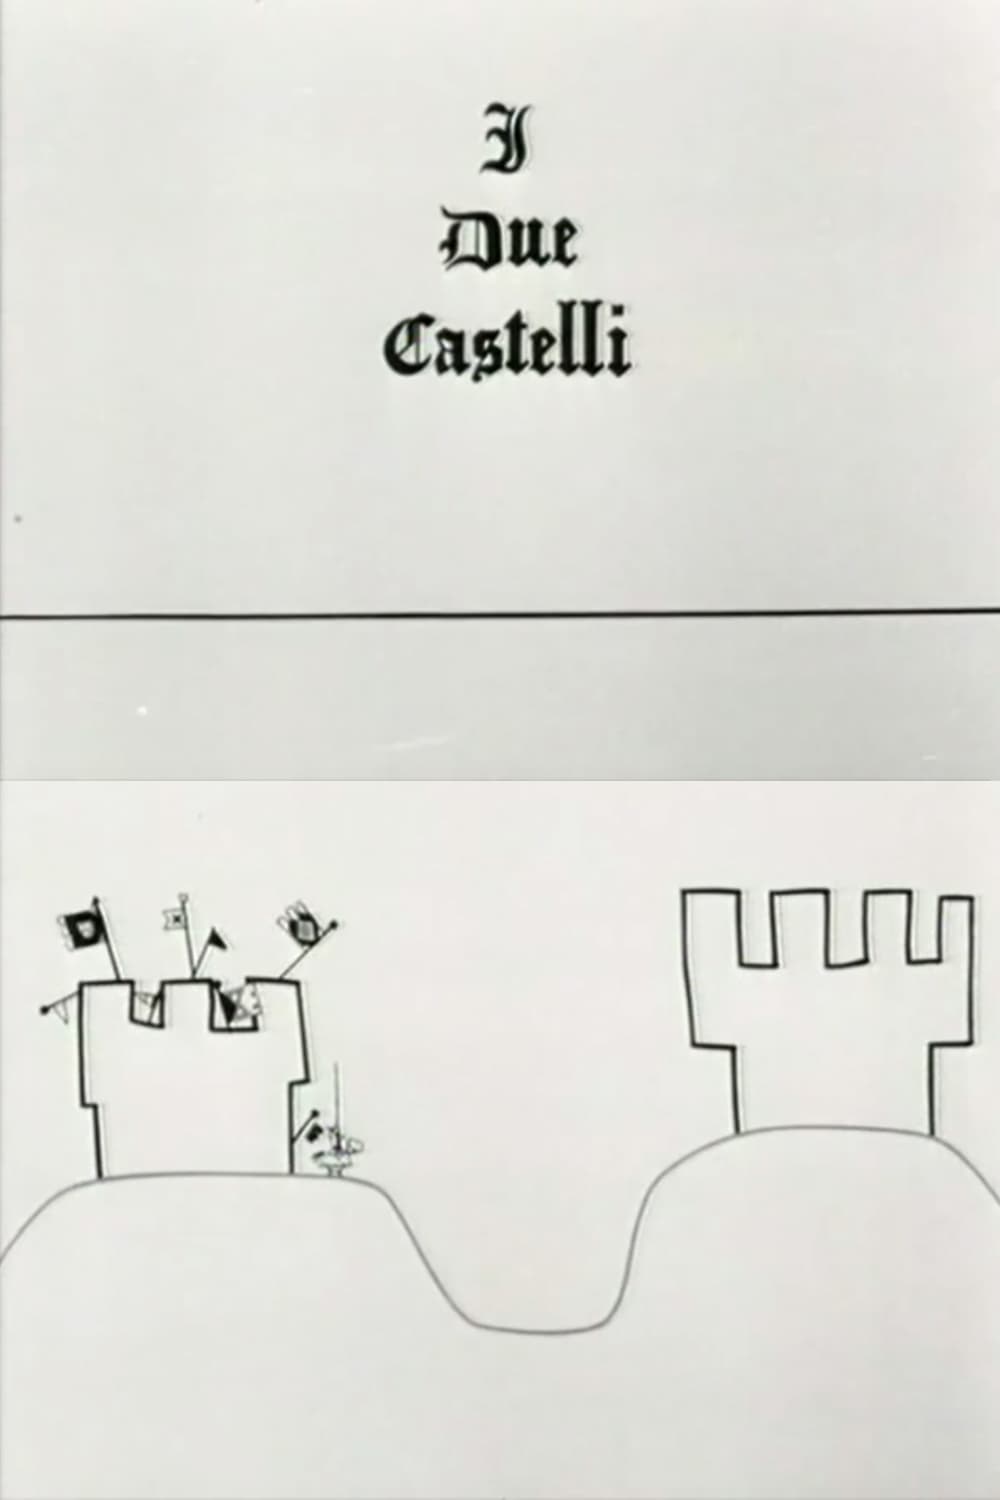 The Two Castles